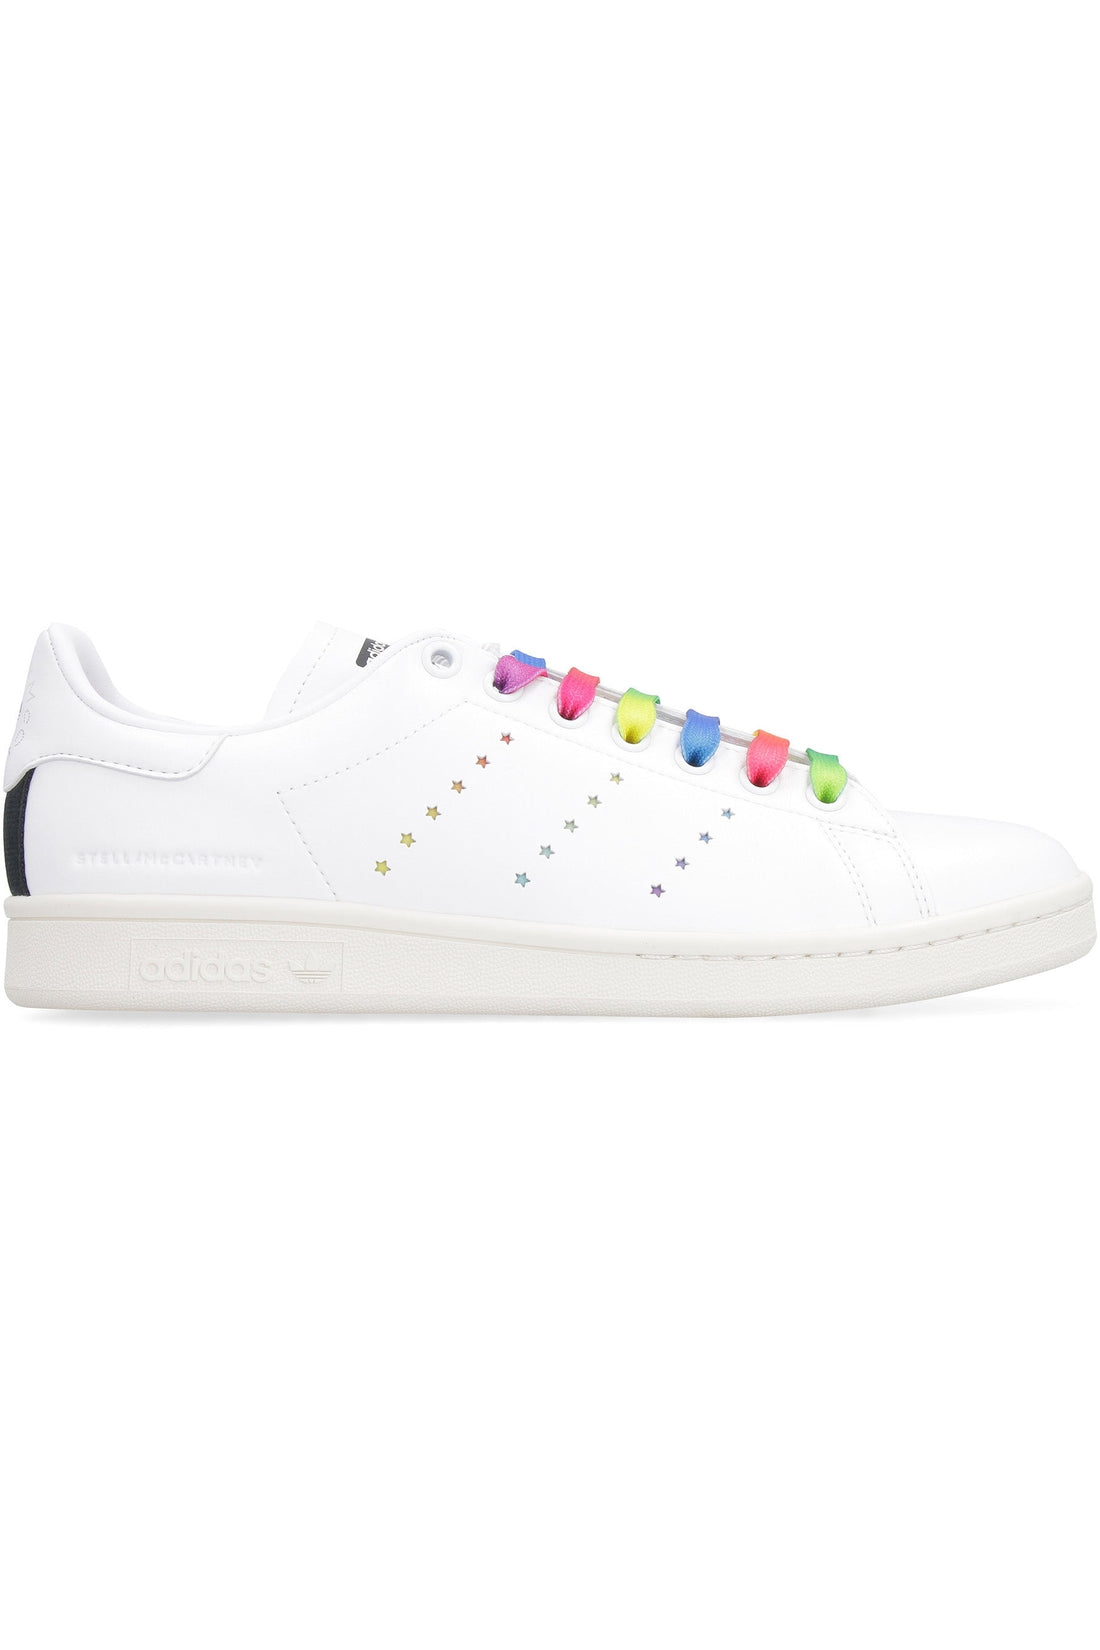 Stella McCartney-OUTLET-SALE-Stan Smith Adidas by Stella McCartney sneakers-ARCHIVIST